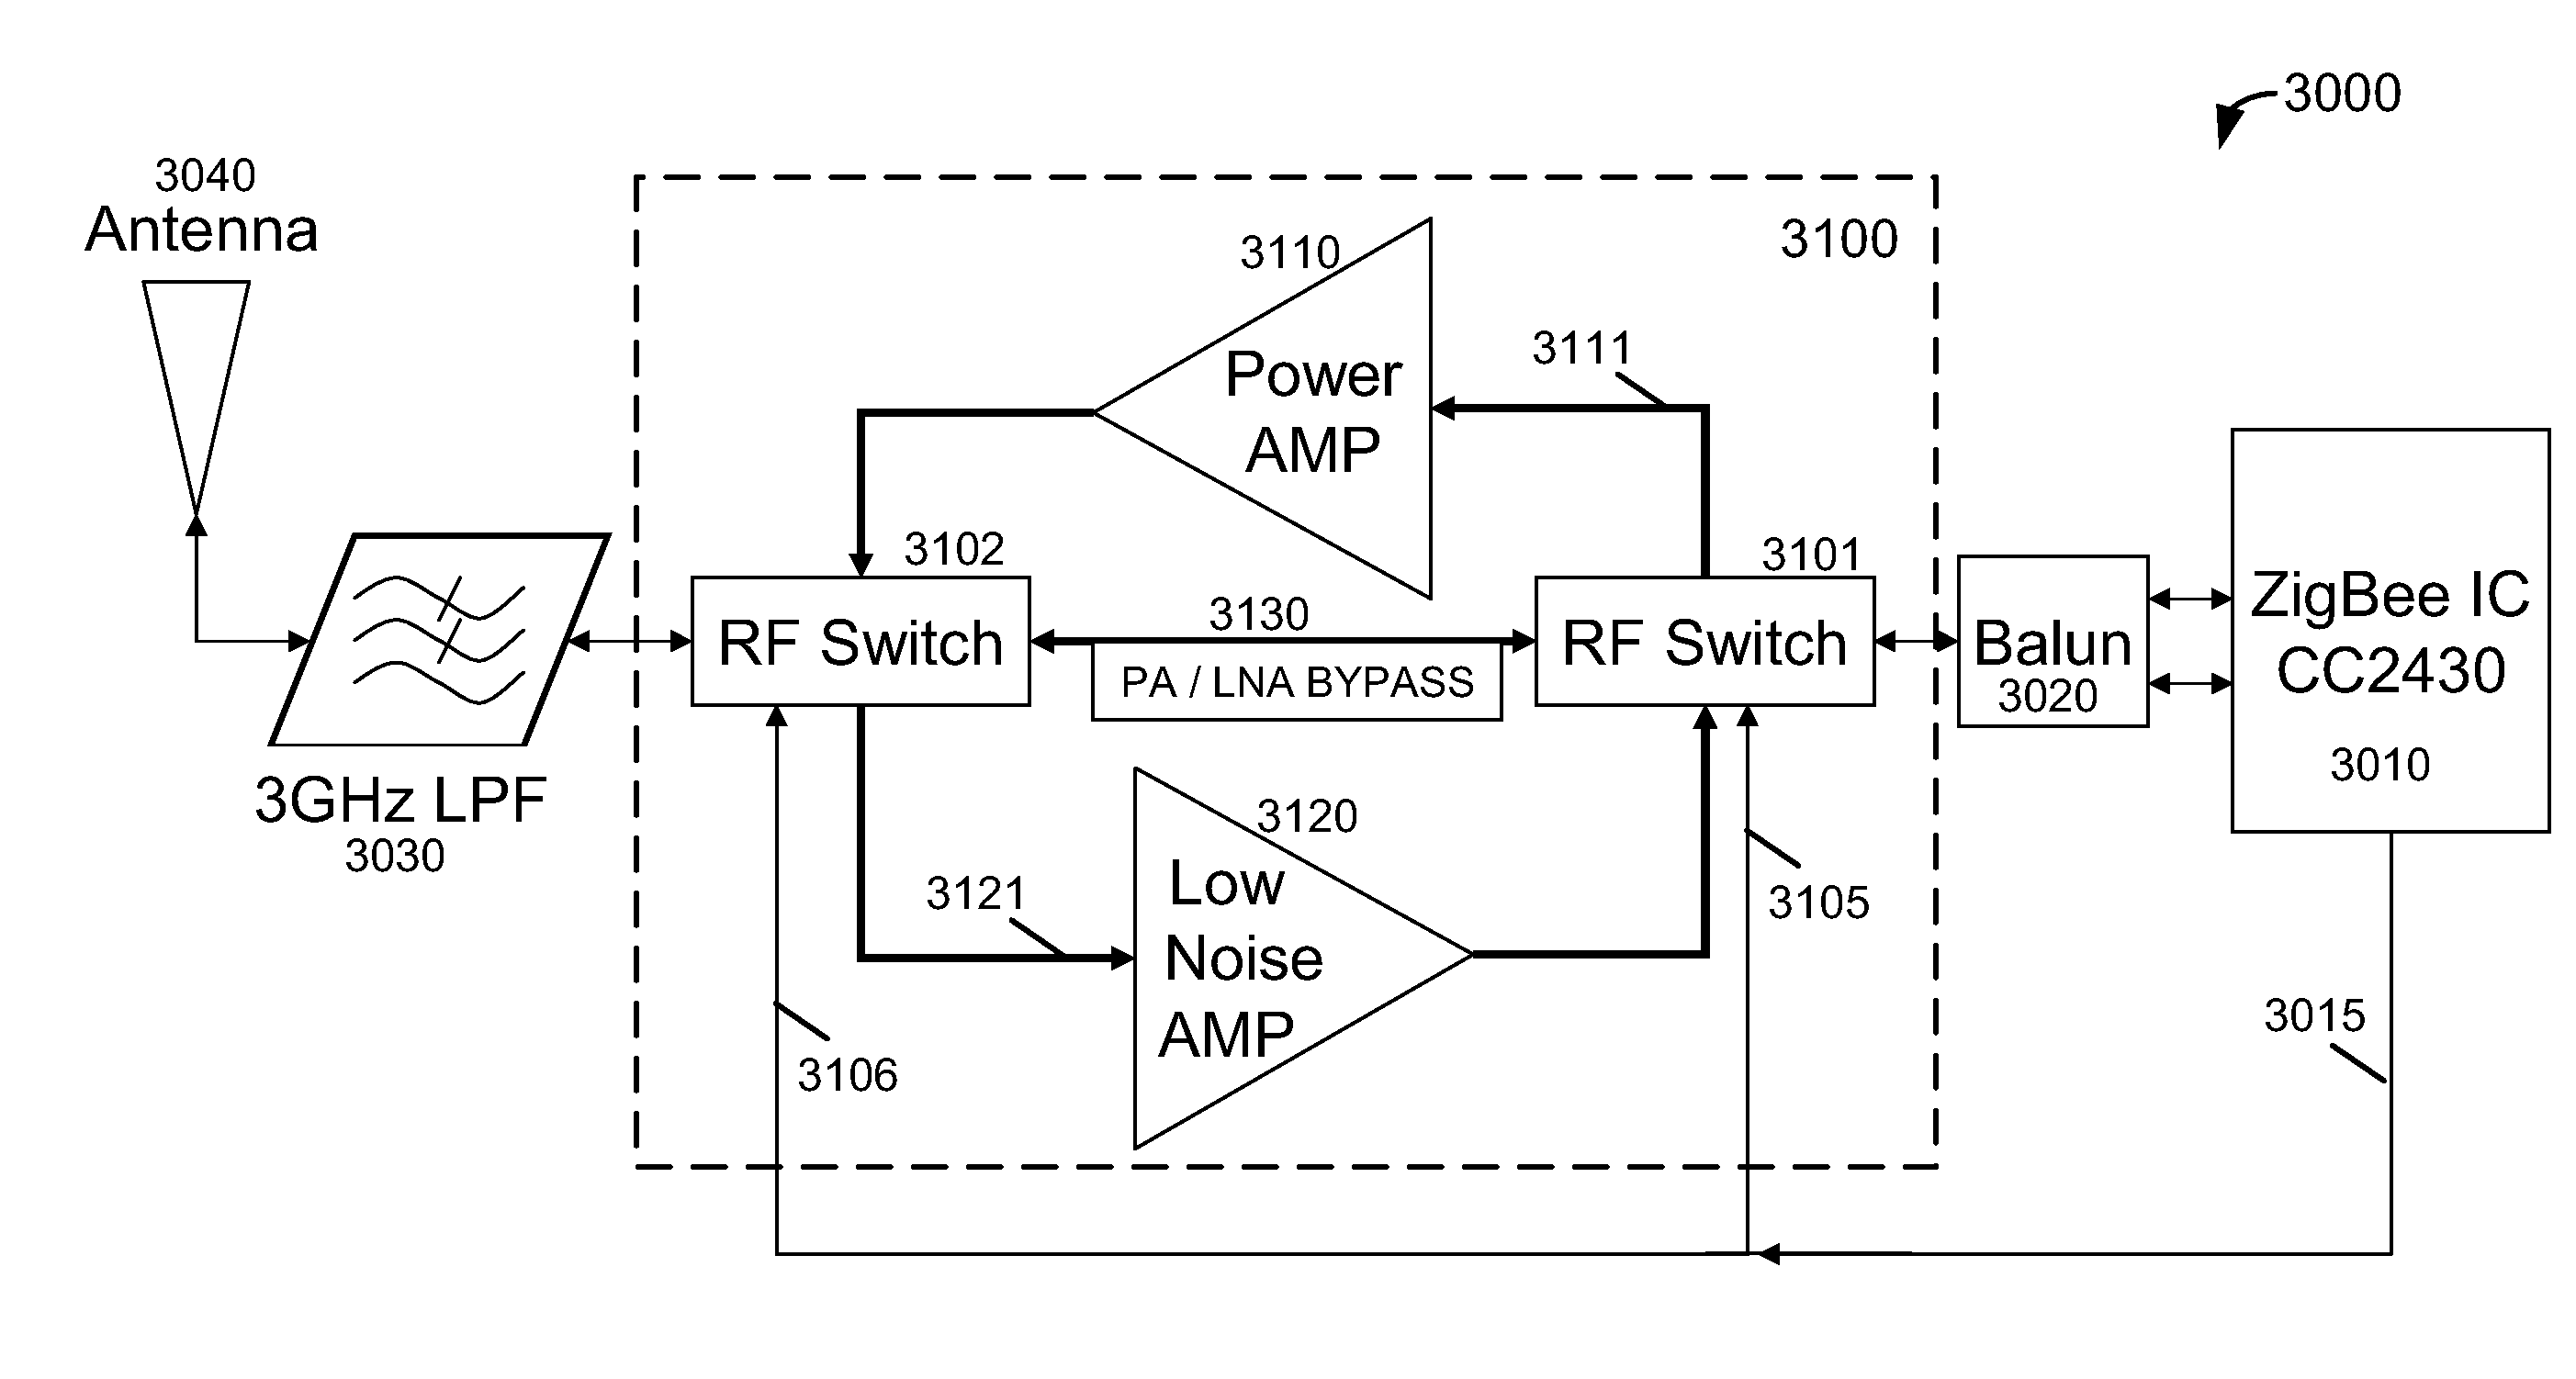 Automated power control to optimize power consumption and improved wireless connection